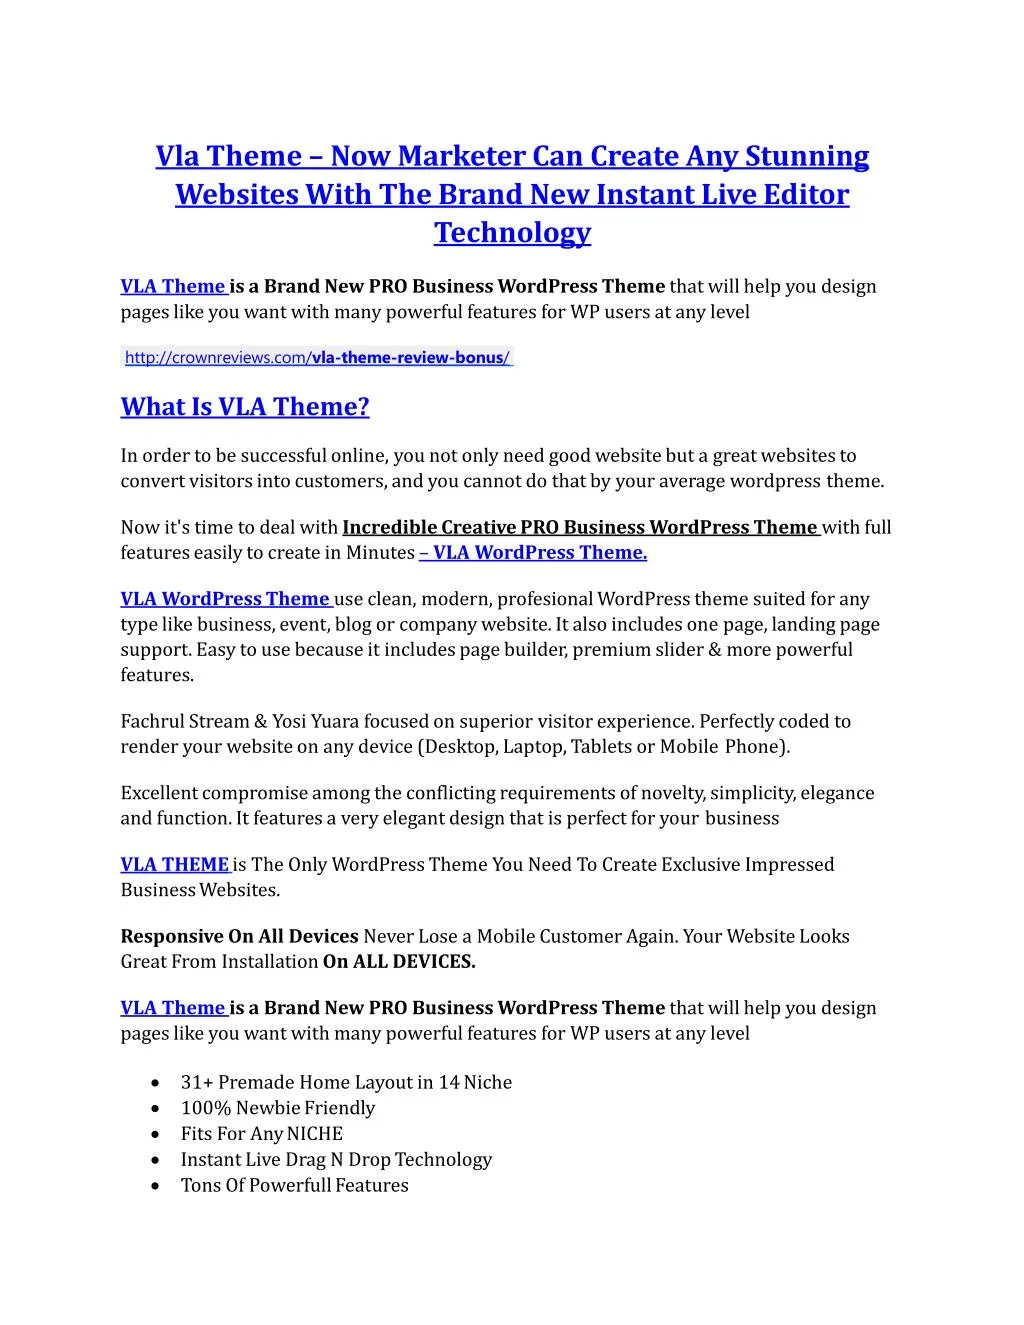 vla theme now marketer can create any stunning